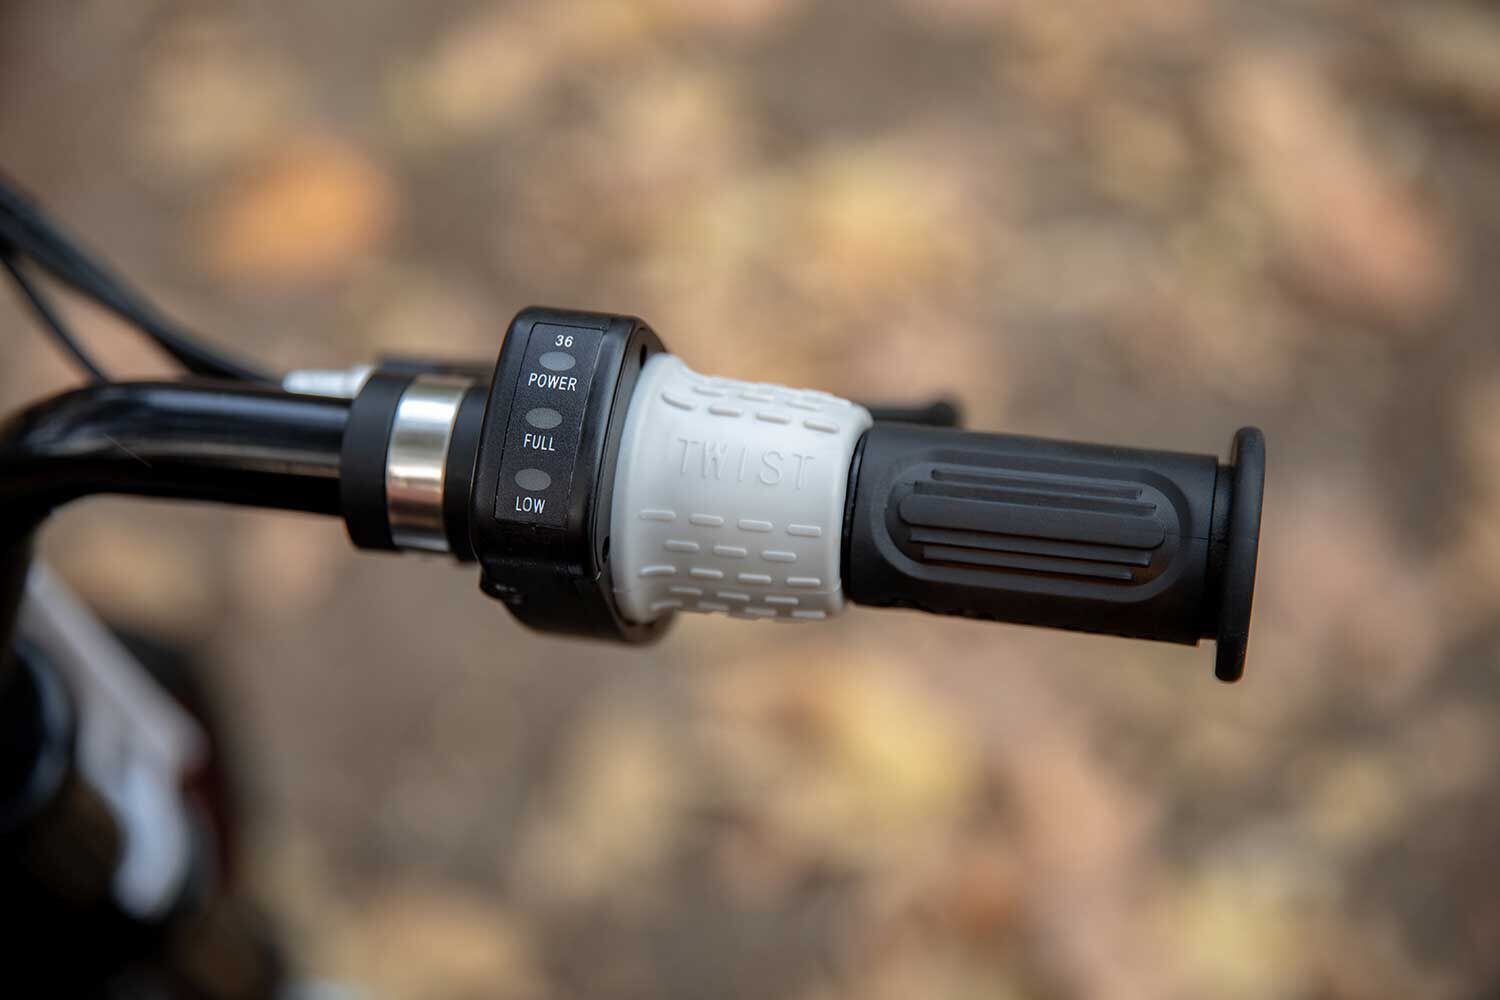 The eFTR comes with a twist grip throttle.